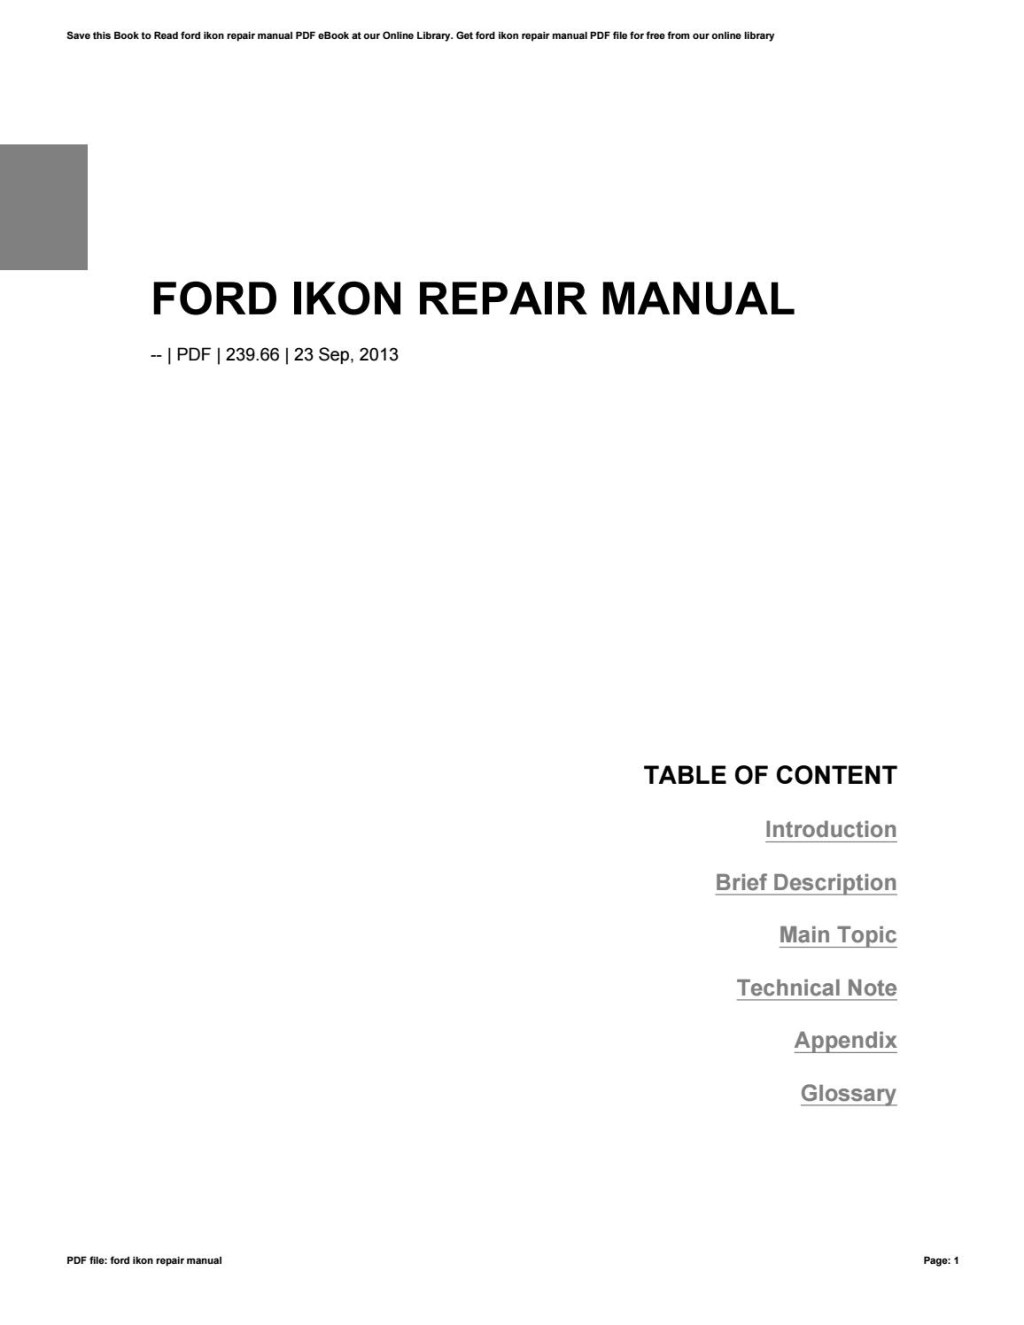 Picture of: Ford ikon repair manual by sulaemanjsods – Issuu